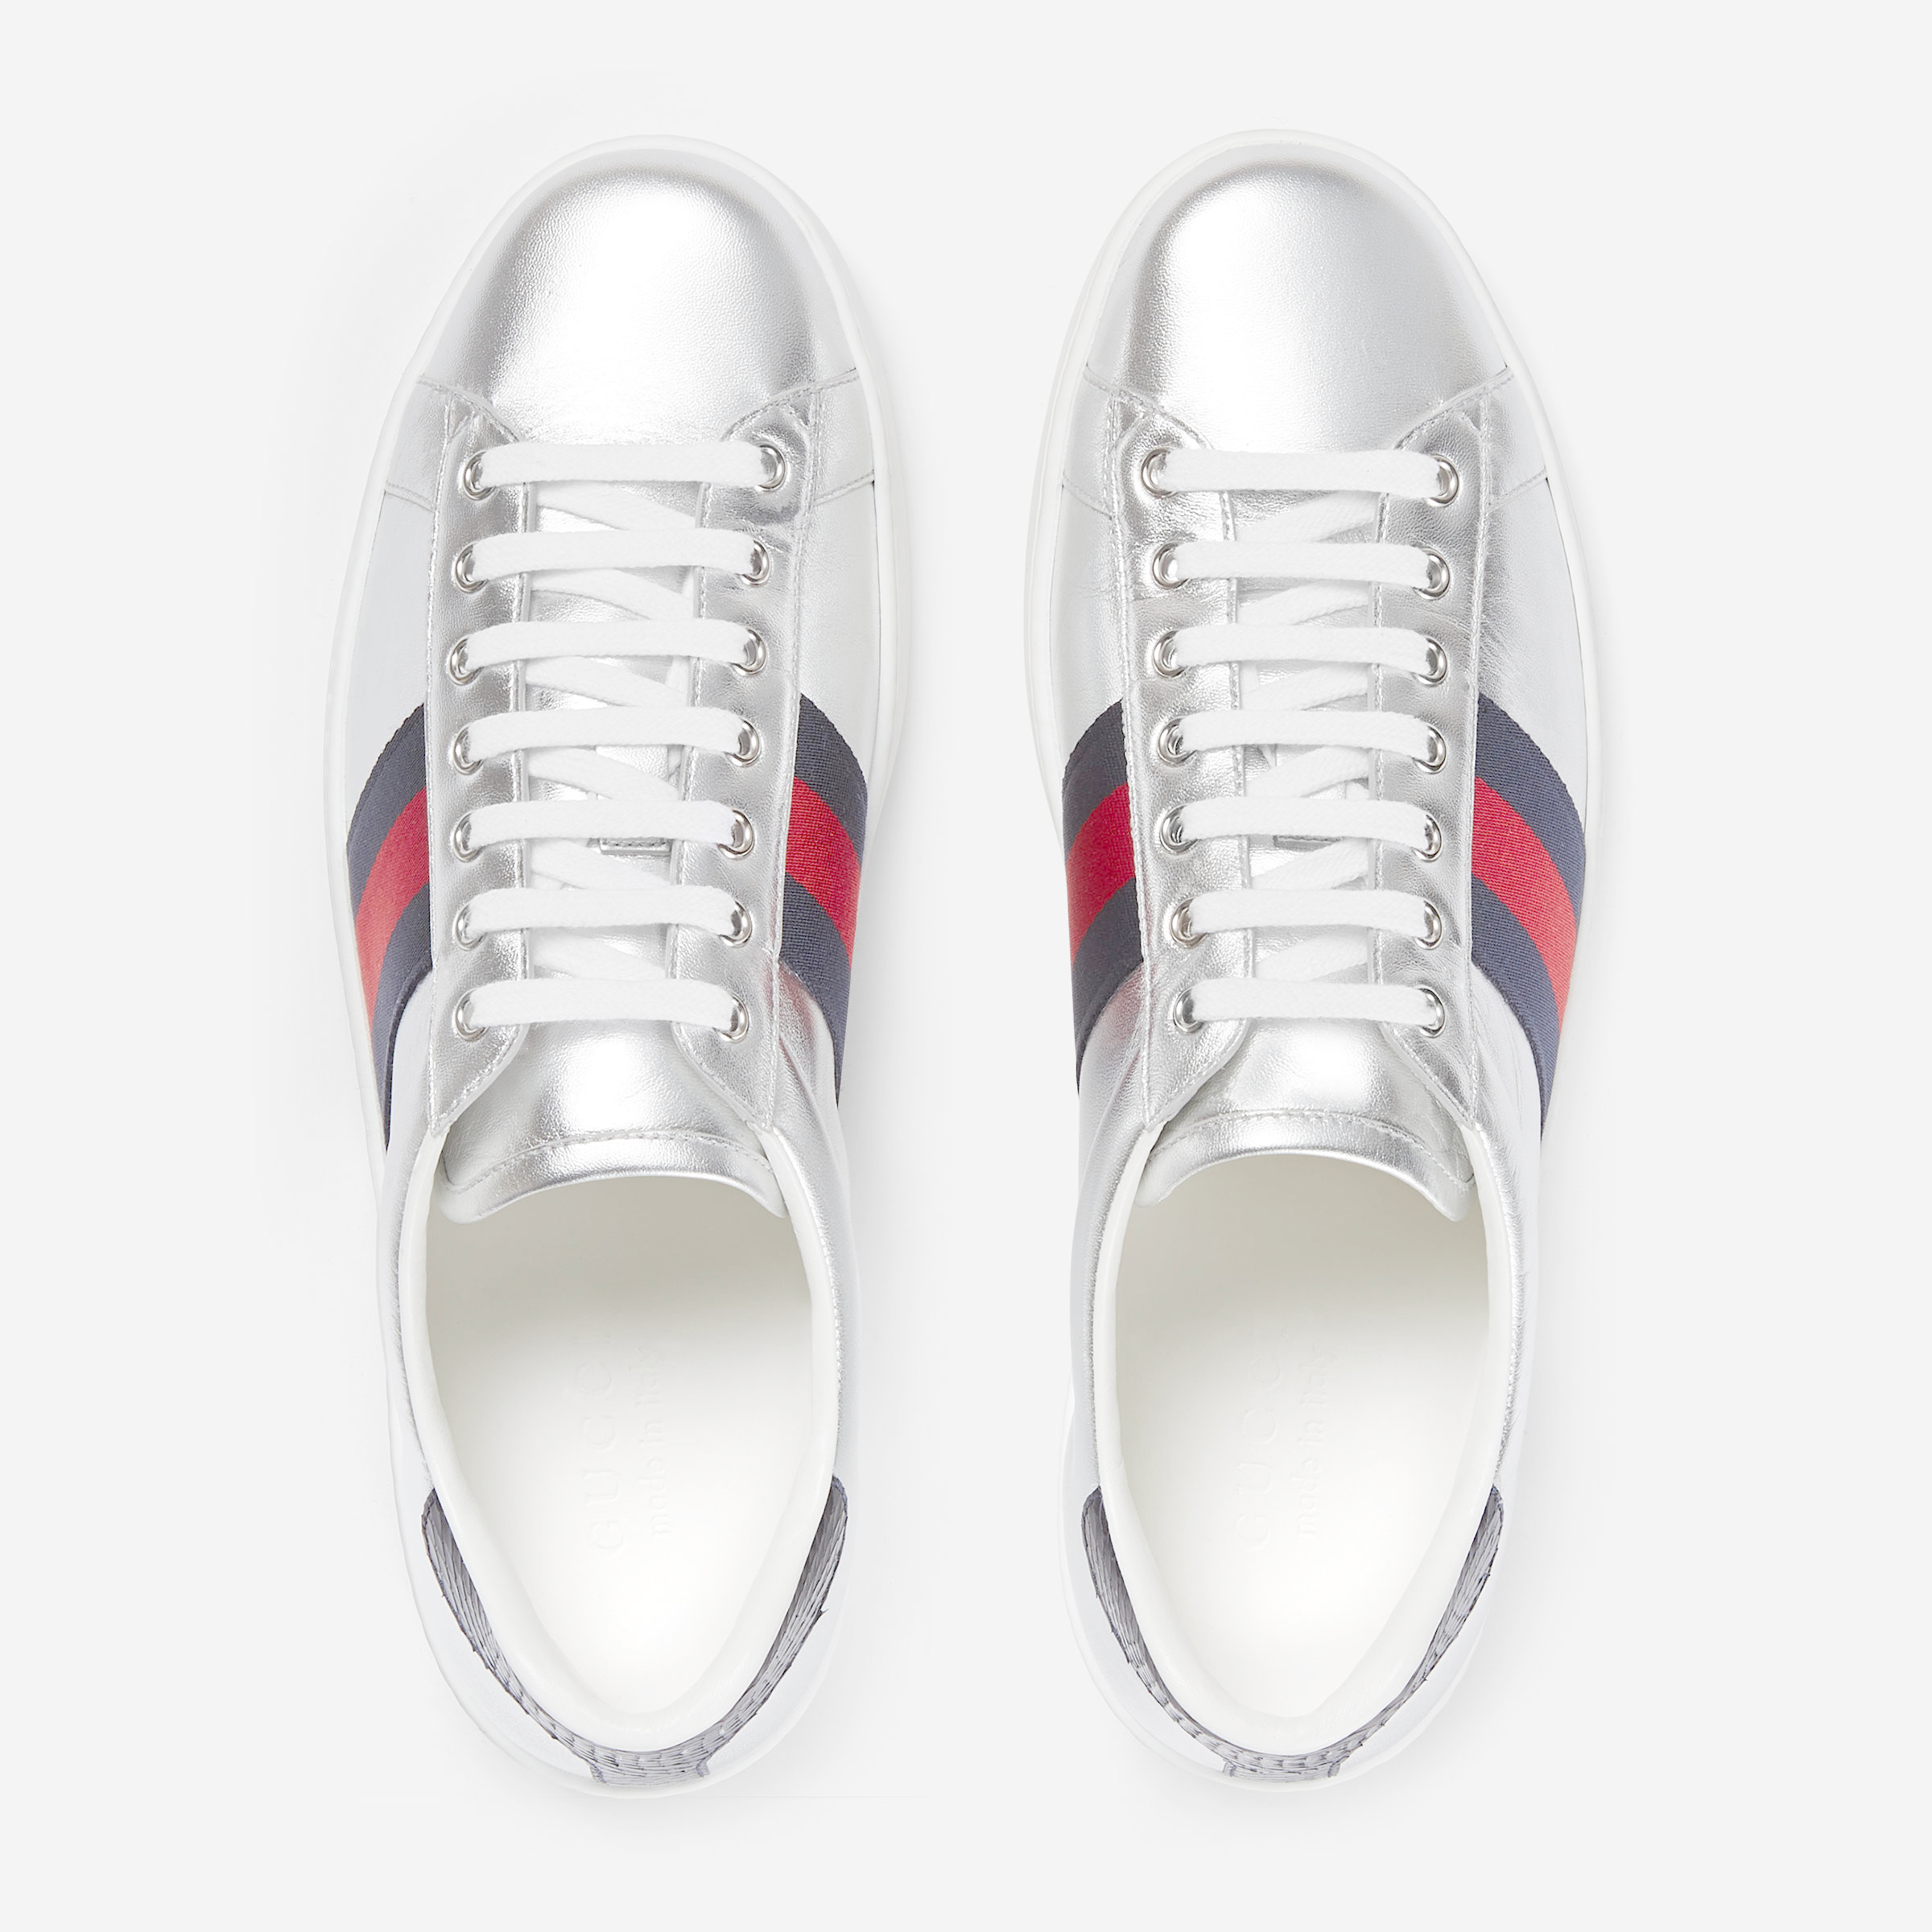 Gucci Ace Metallic Leather Low-top Sneaker for Men - Lyst